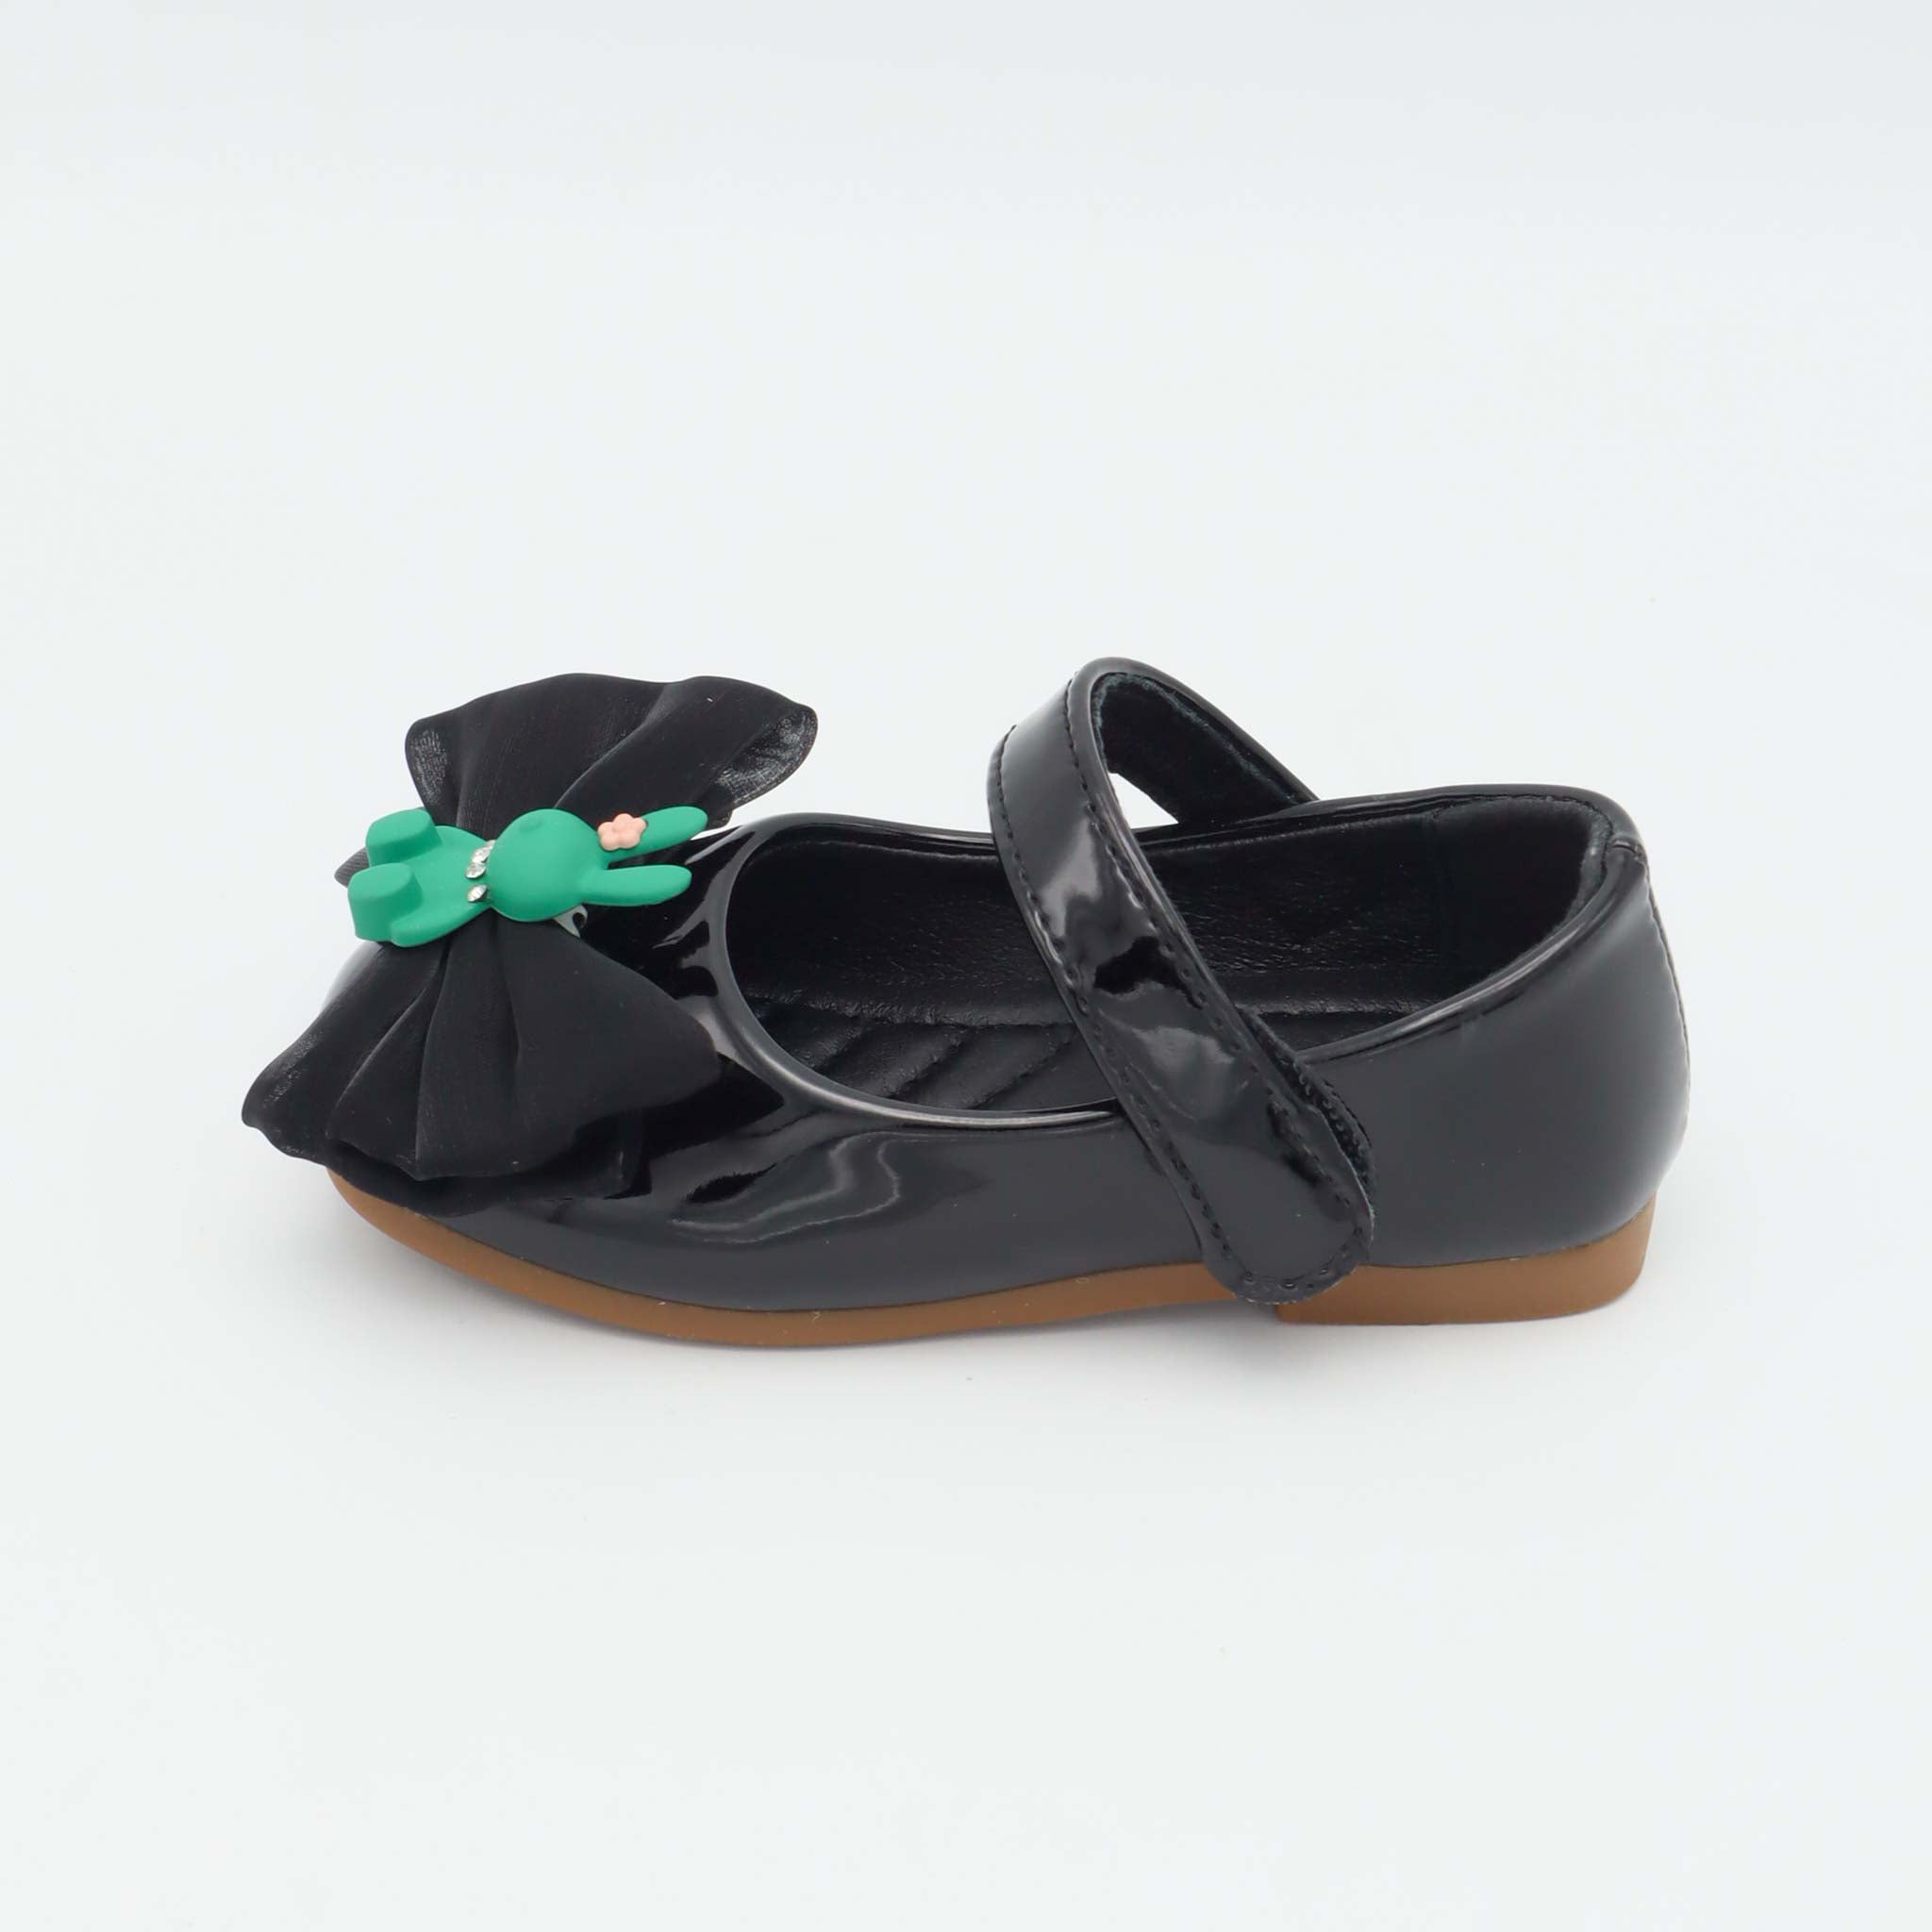 Girls Pumpy Black Color with Bow